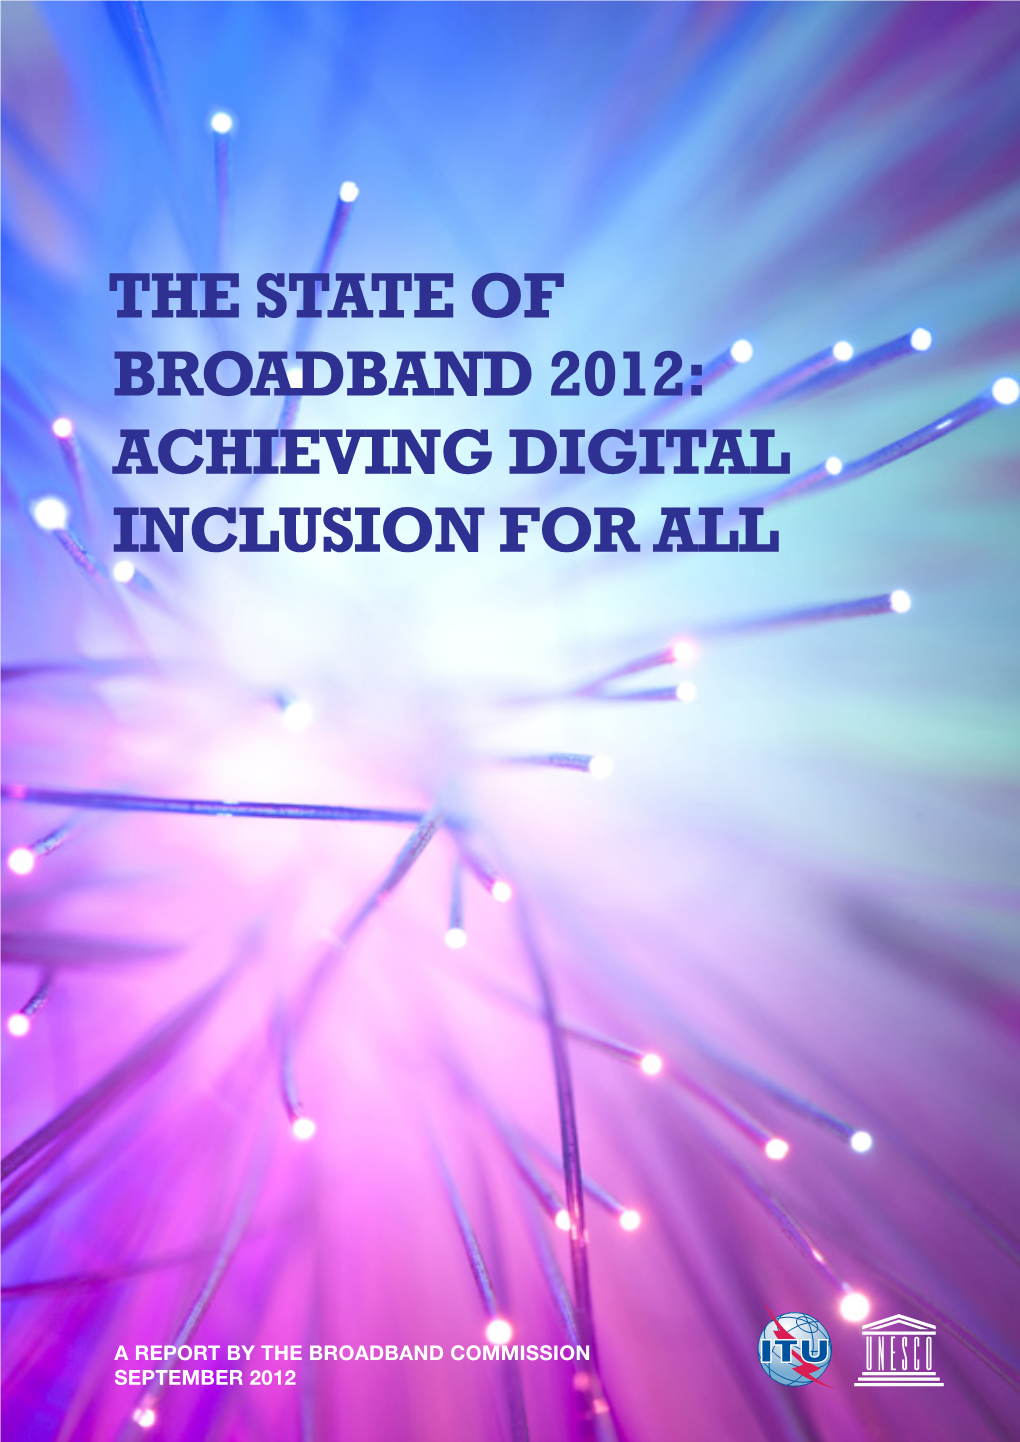 Achieving Digital Inclusion for All